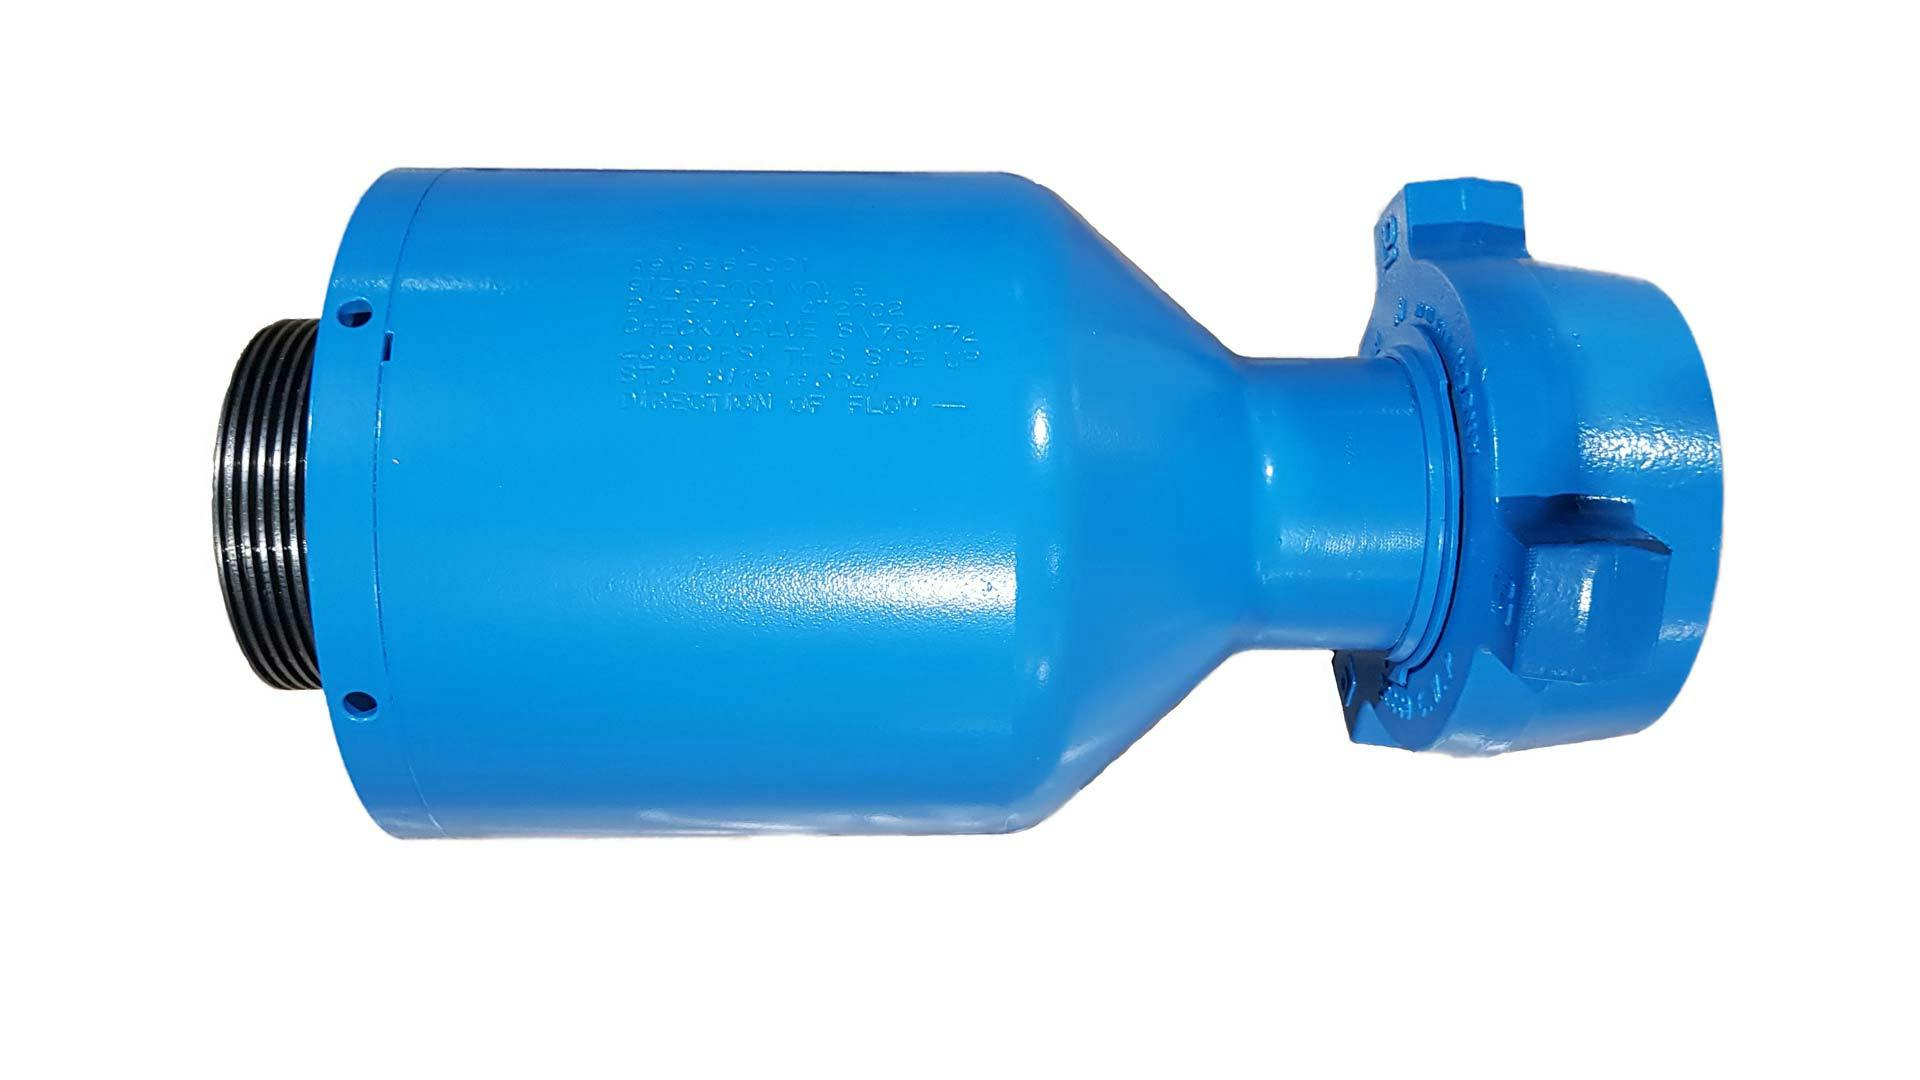 Figure 2002 Check Valve side view